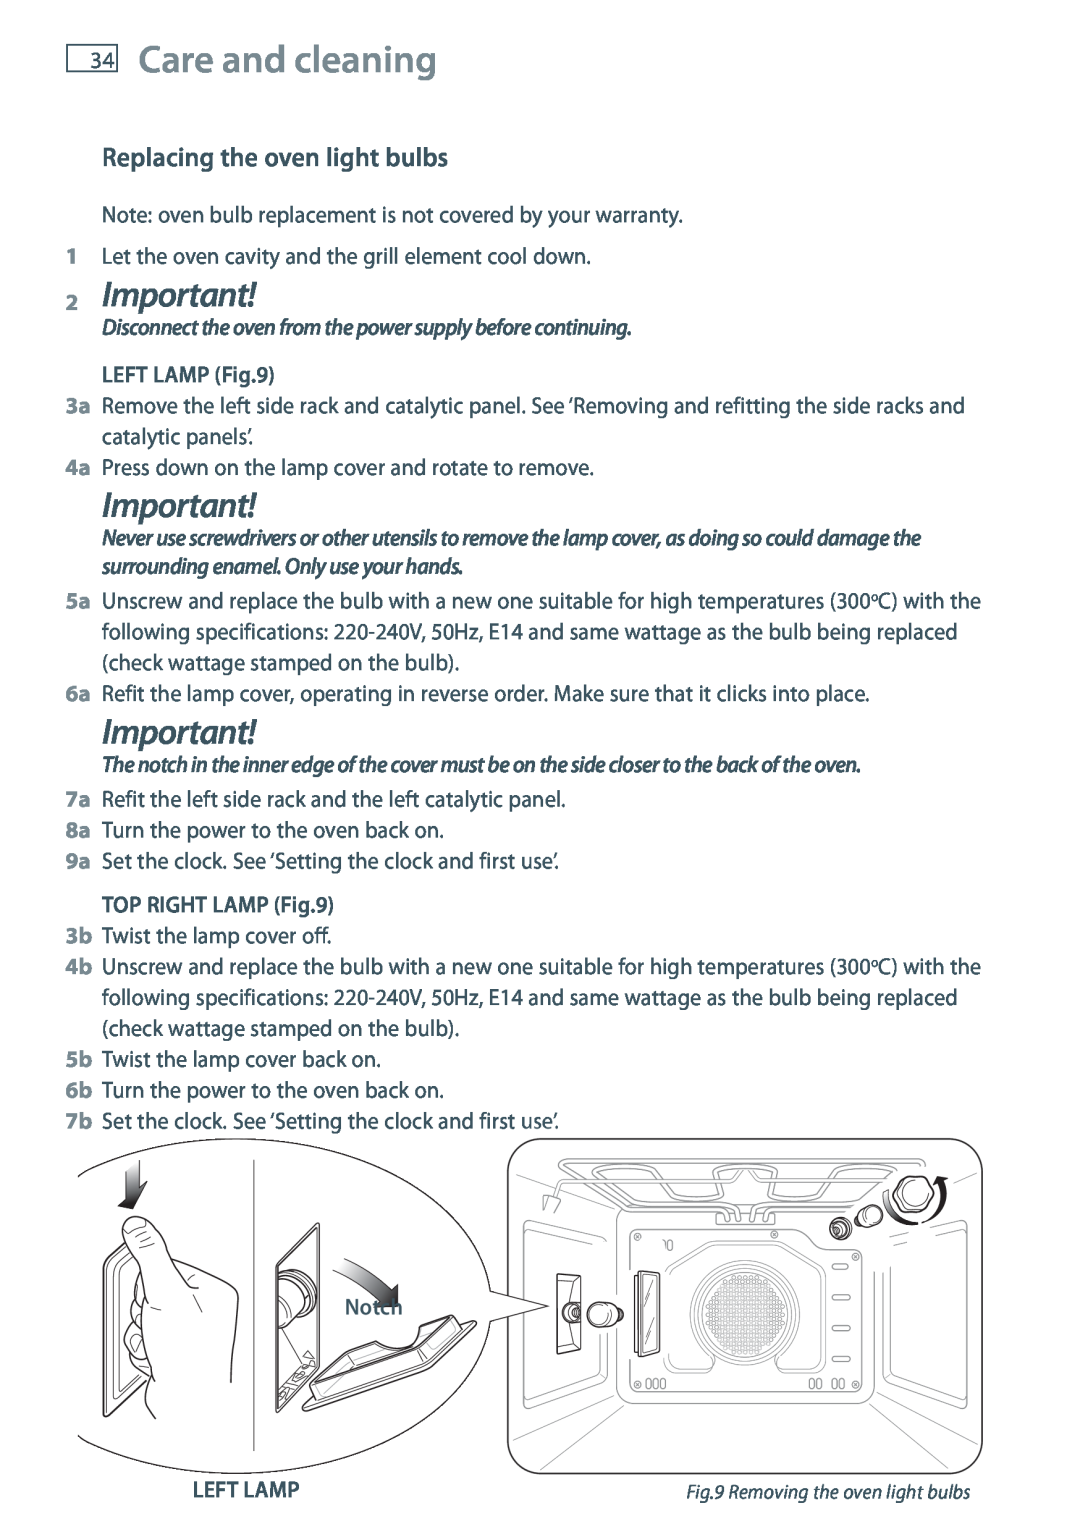 Fisher & Paykel OB60S9DE installation instructions Care and cleaning, 2Important, Replacing the oven light bulbs, Left Lamp 